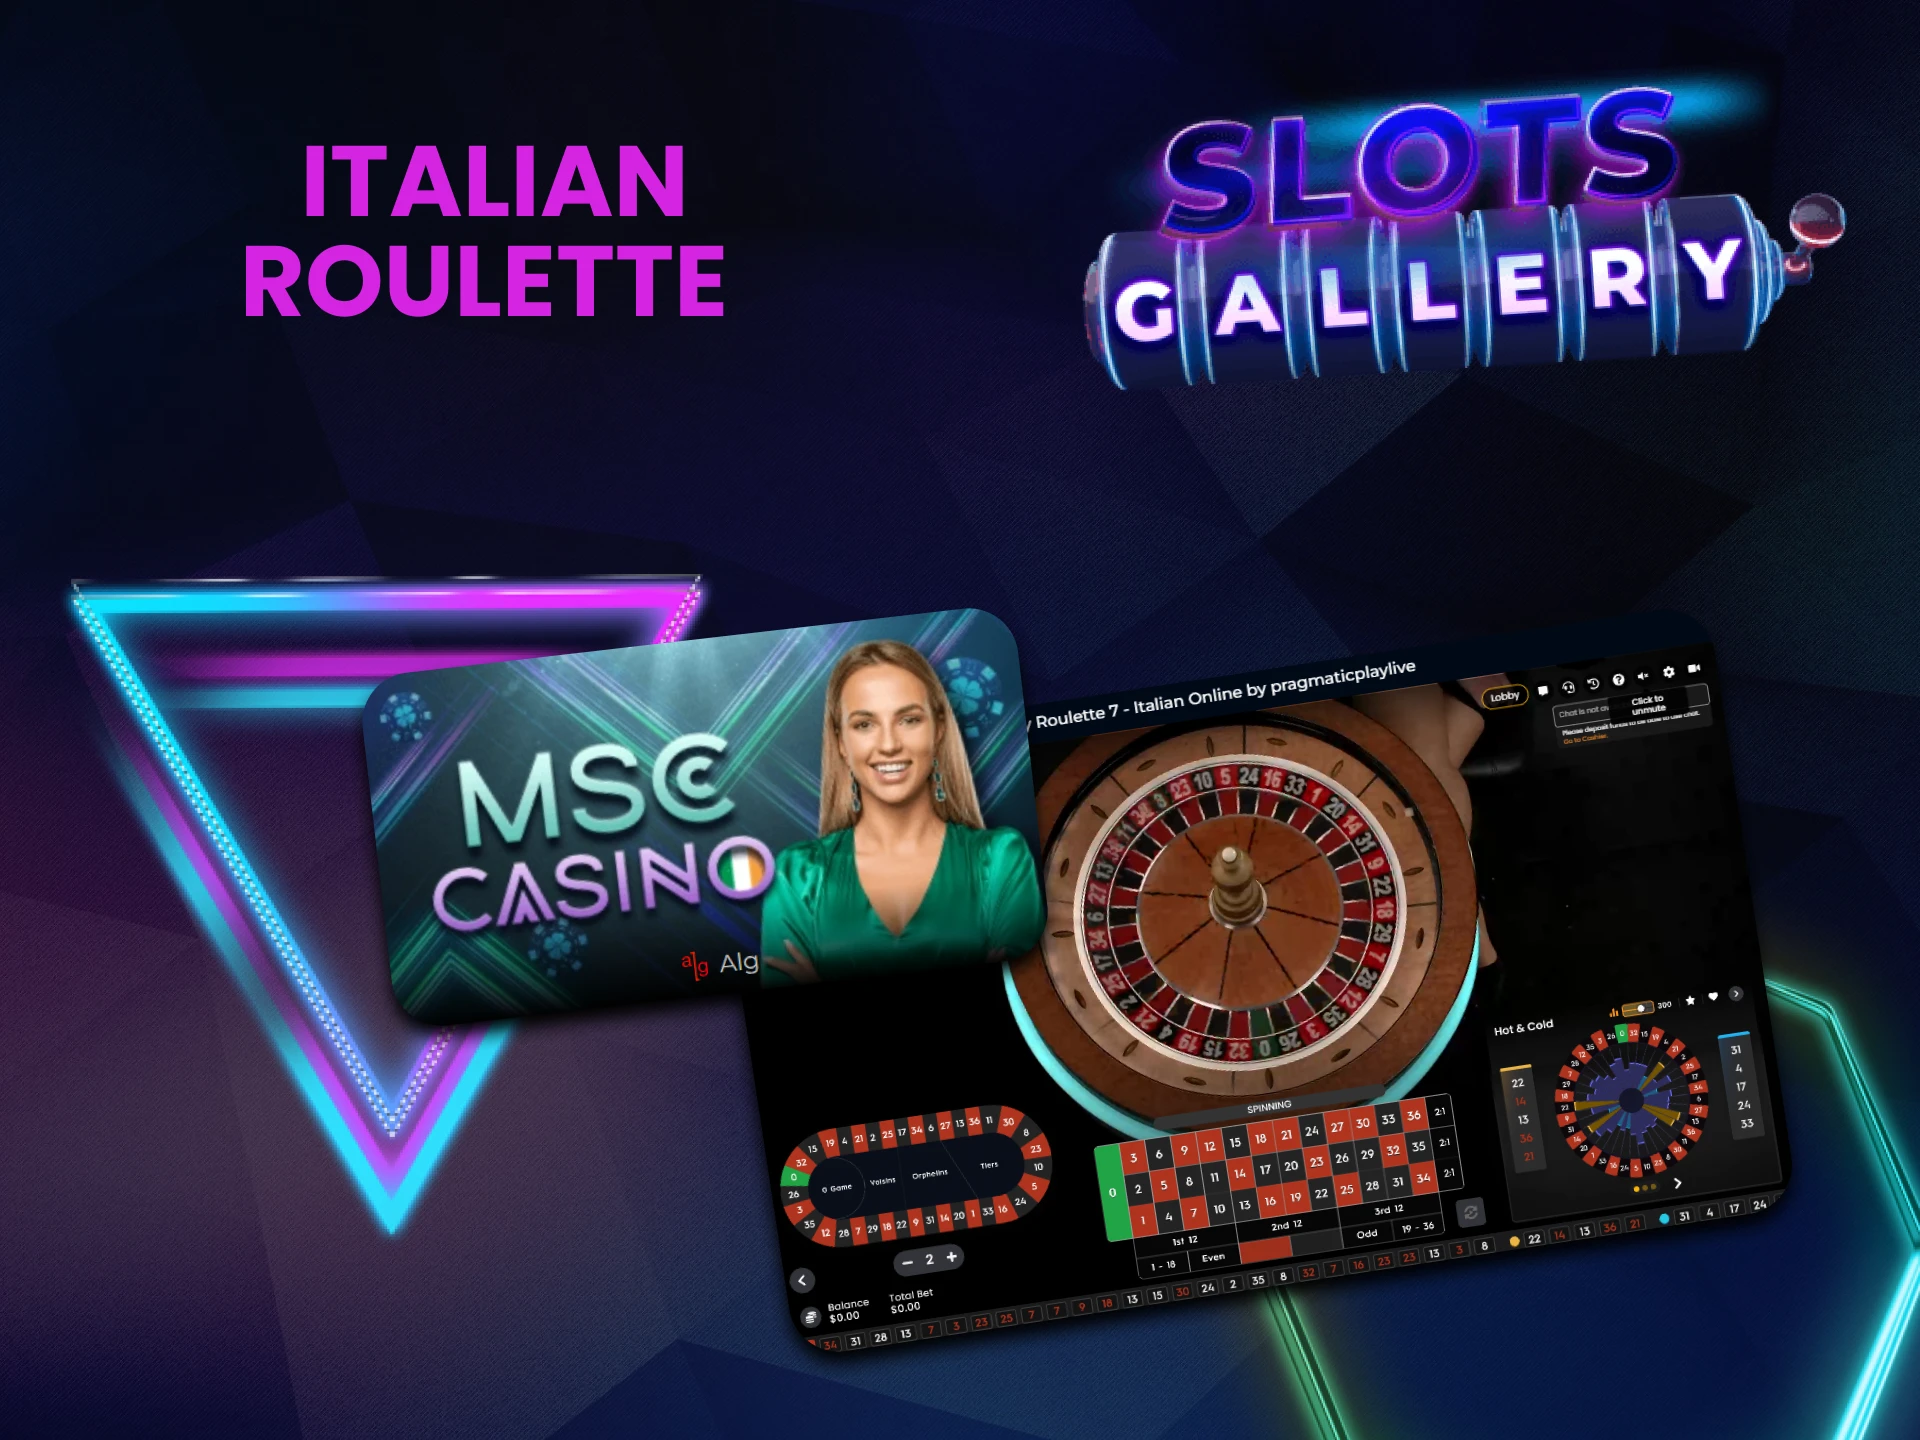 Play Italian Roulette at Slots Gallery.